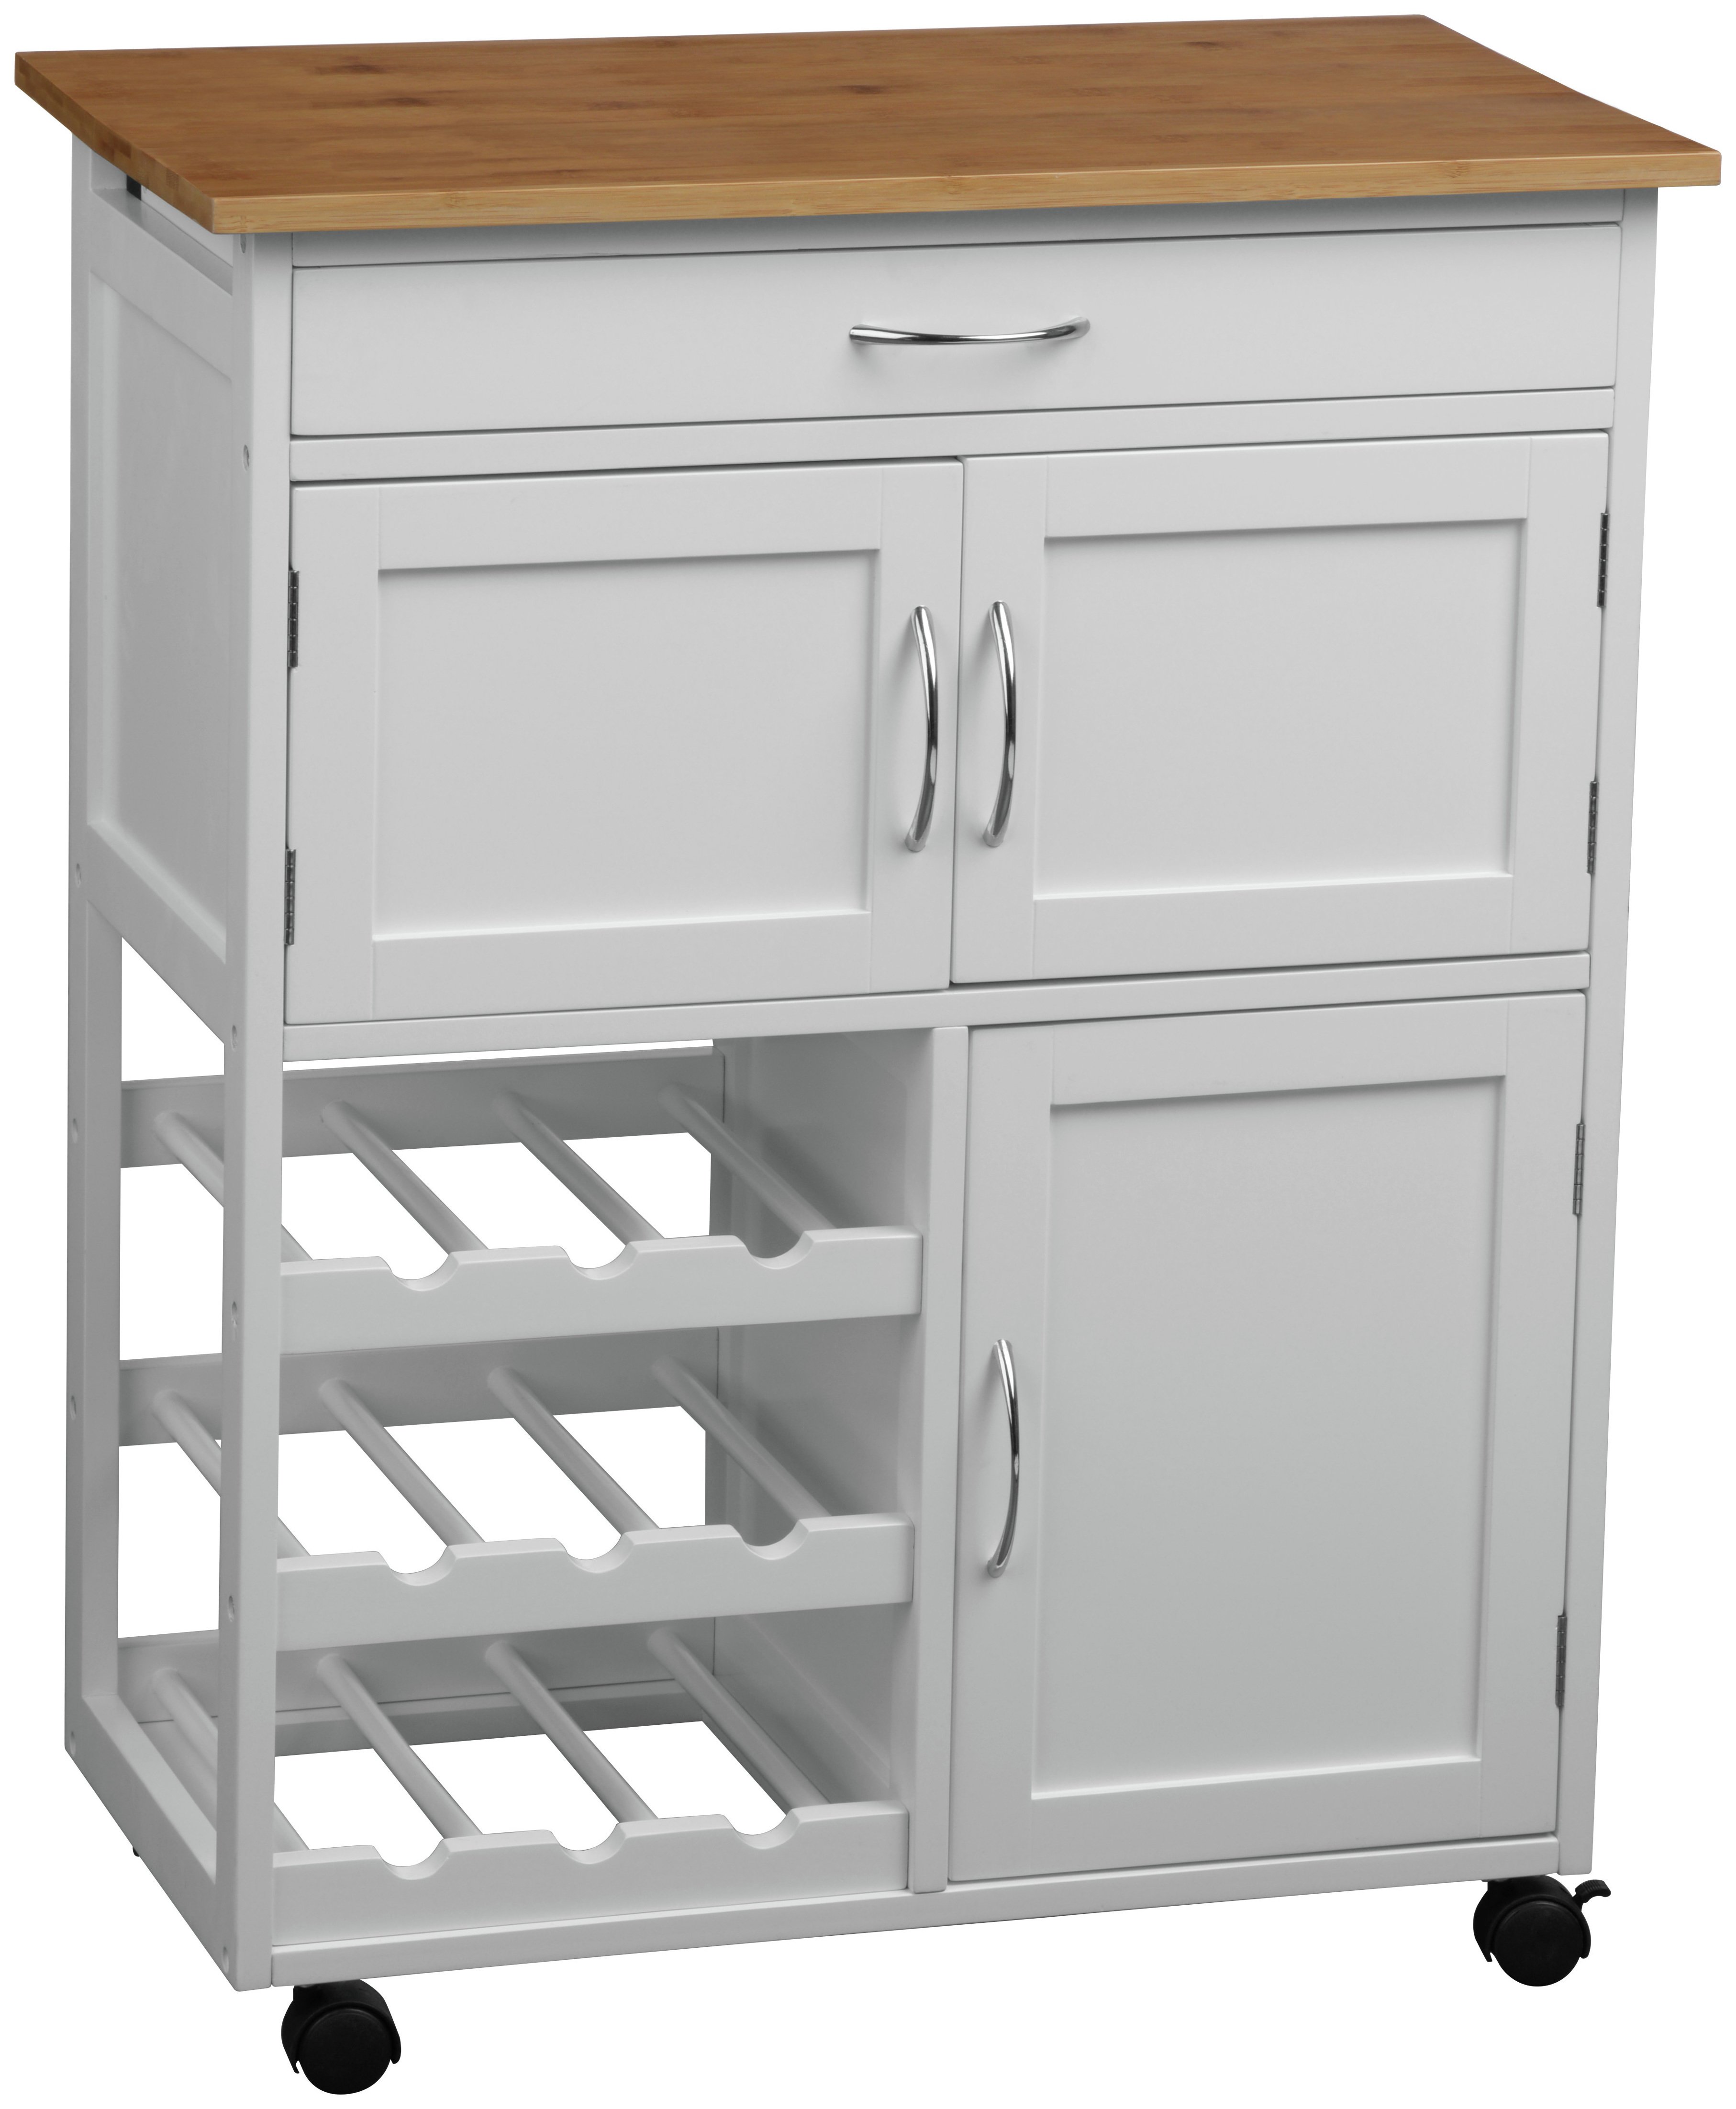 Bamboo Top Kitchen Trolley - White